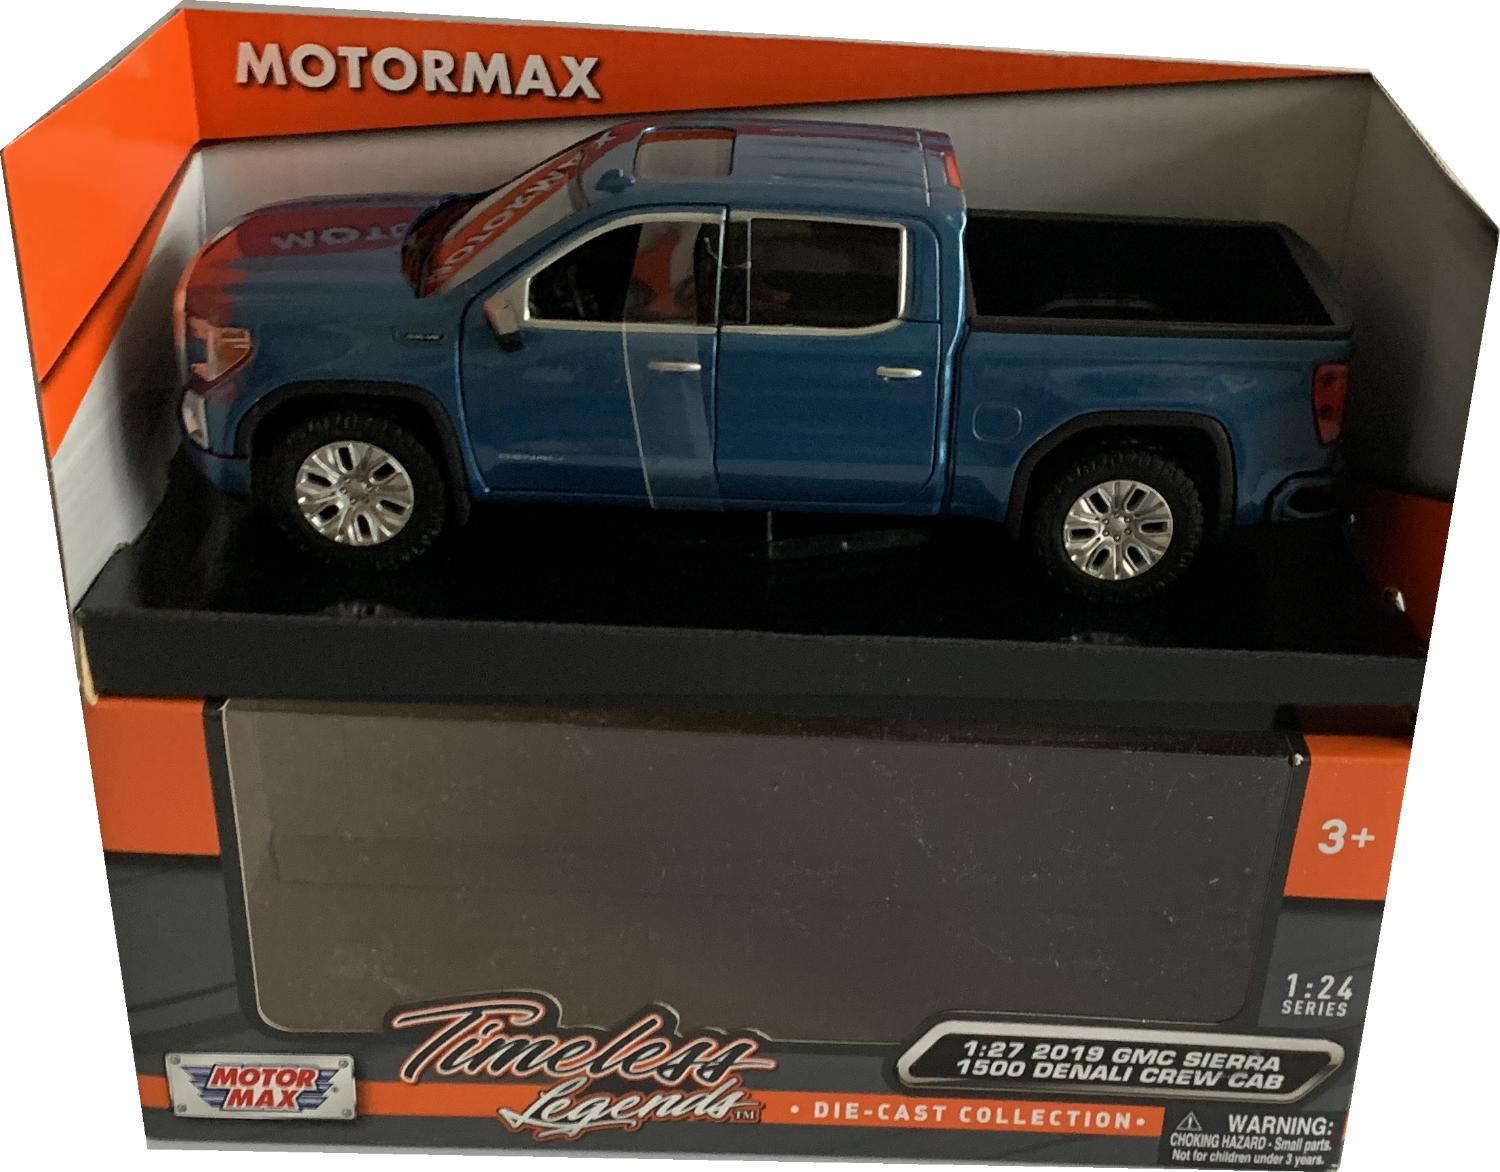 A good reproduction of the GMC Sierra 1500 Denali Crew Cab with detail throughout, all authentically recreated.  The model is presented in a window display box, the car is approx. 21.5 cm long and the presentation box is 24.5 cm